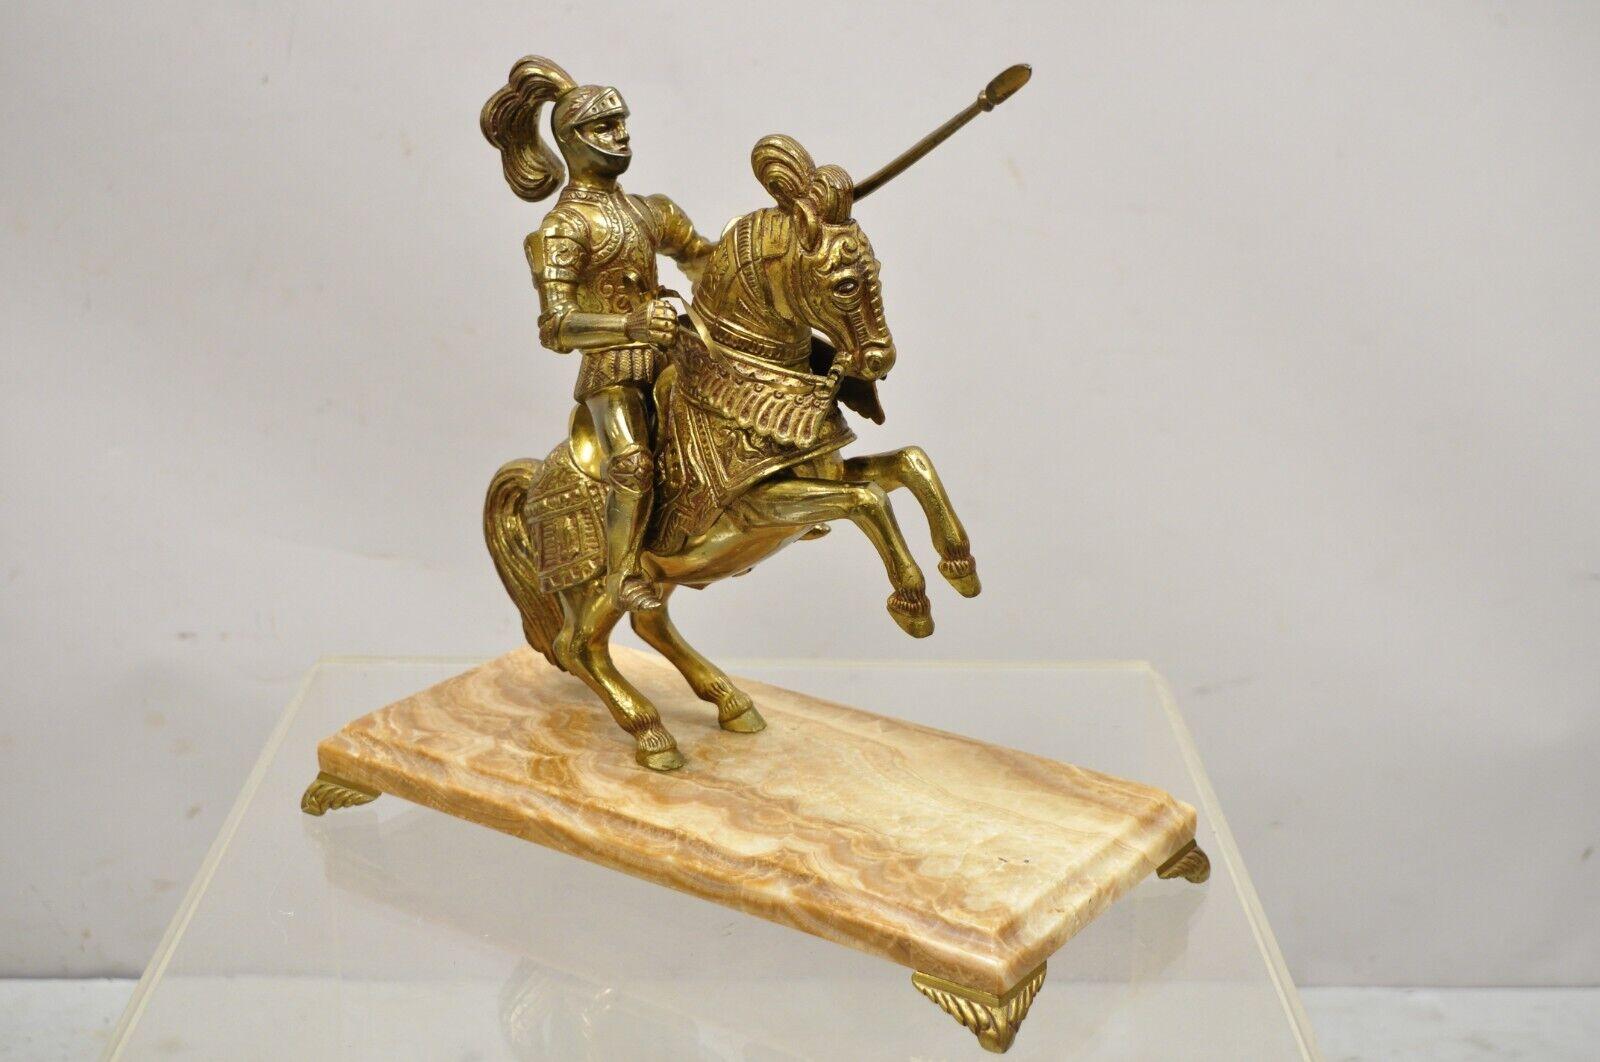 Vintage Cast Metal Marble Base Renaissance Style Gothic Soldier on Horse Statue Figure. Item features  Marble base figural cast metal figure of horse riding soldier, gold finish. Very nice vintage item, great style and form. Circa Mid 20th Century.